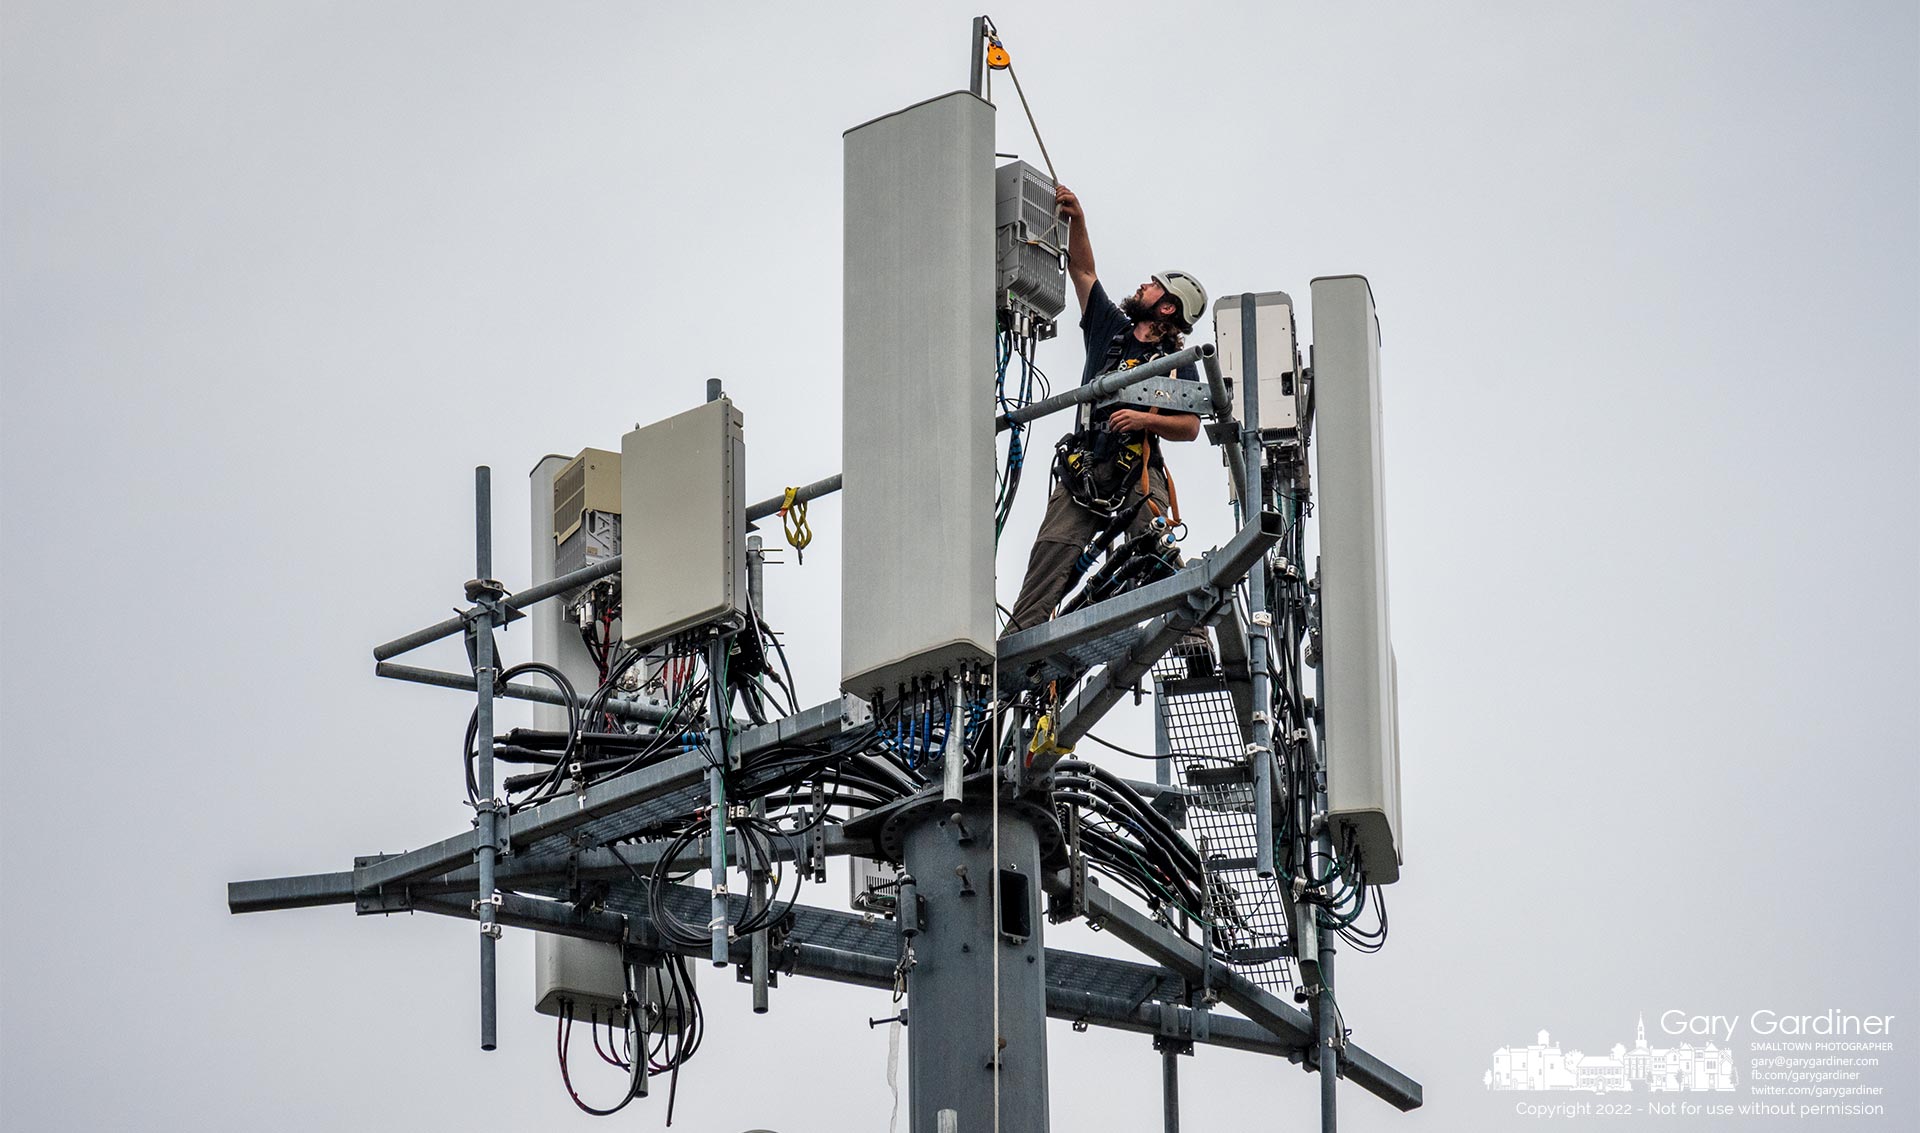 A technician replaces a T-Mobile cellular radio at the top of the tower along Alum Creek near the West Main Street bridge. My Final Photo for July 26, 2022.